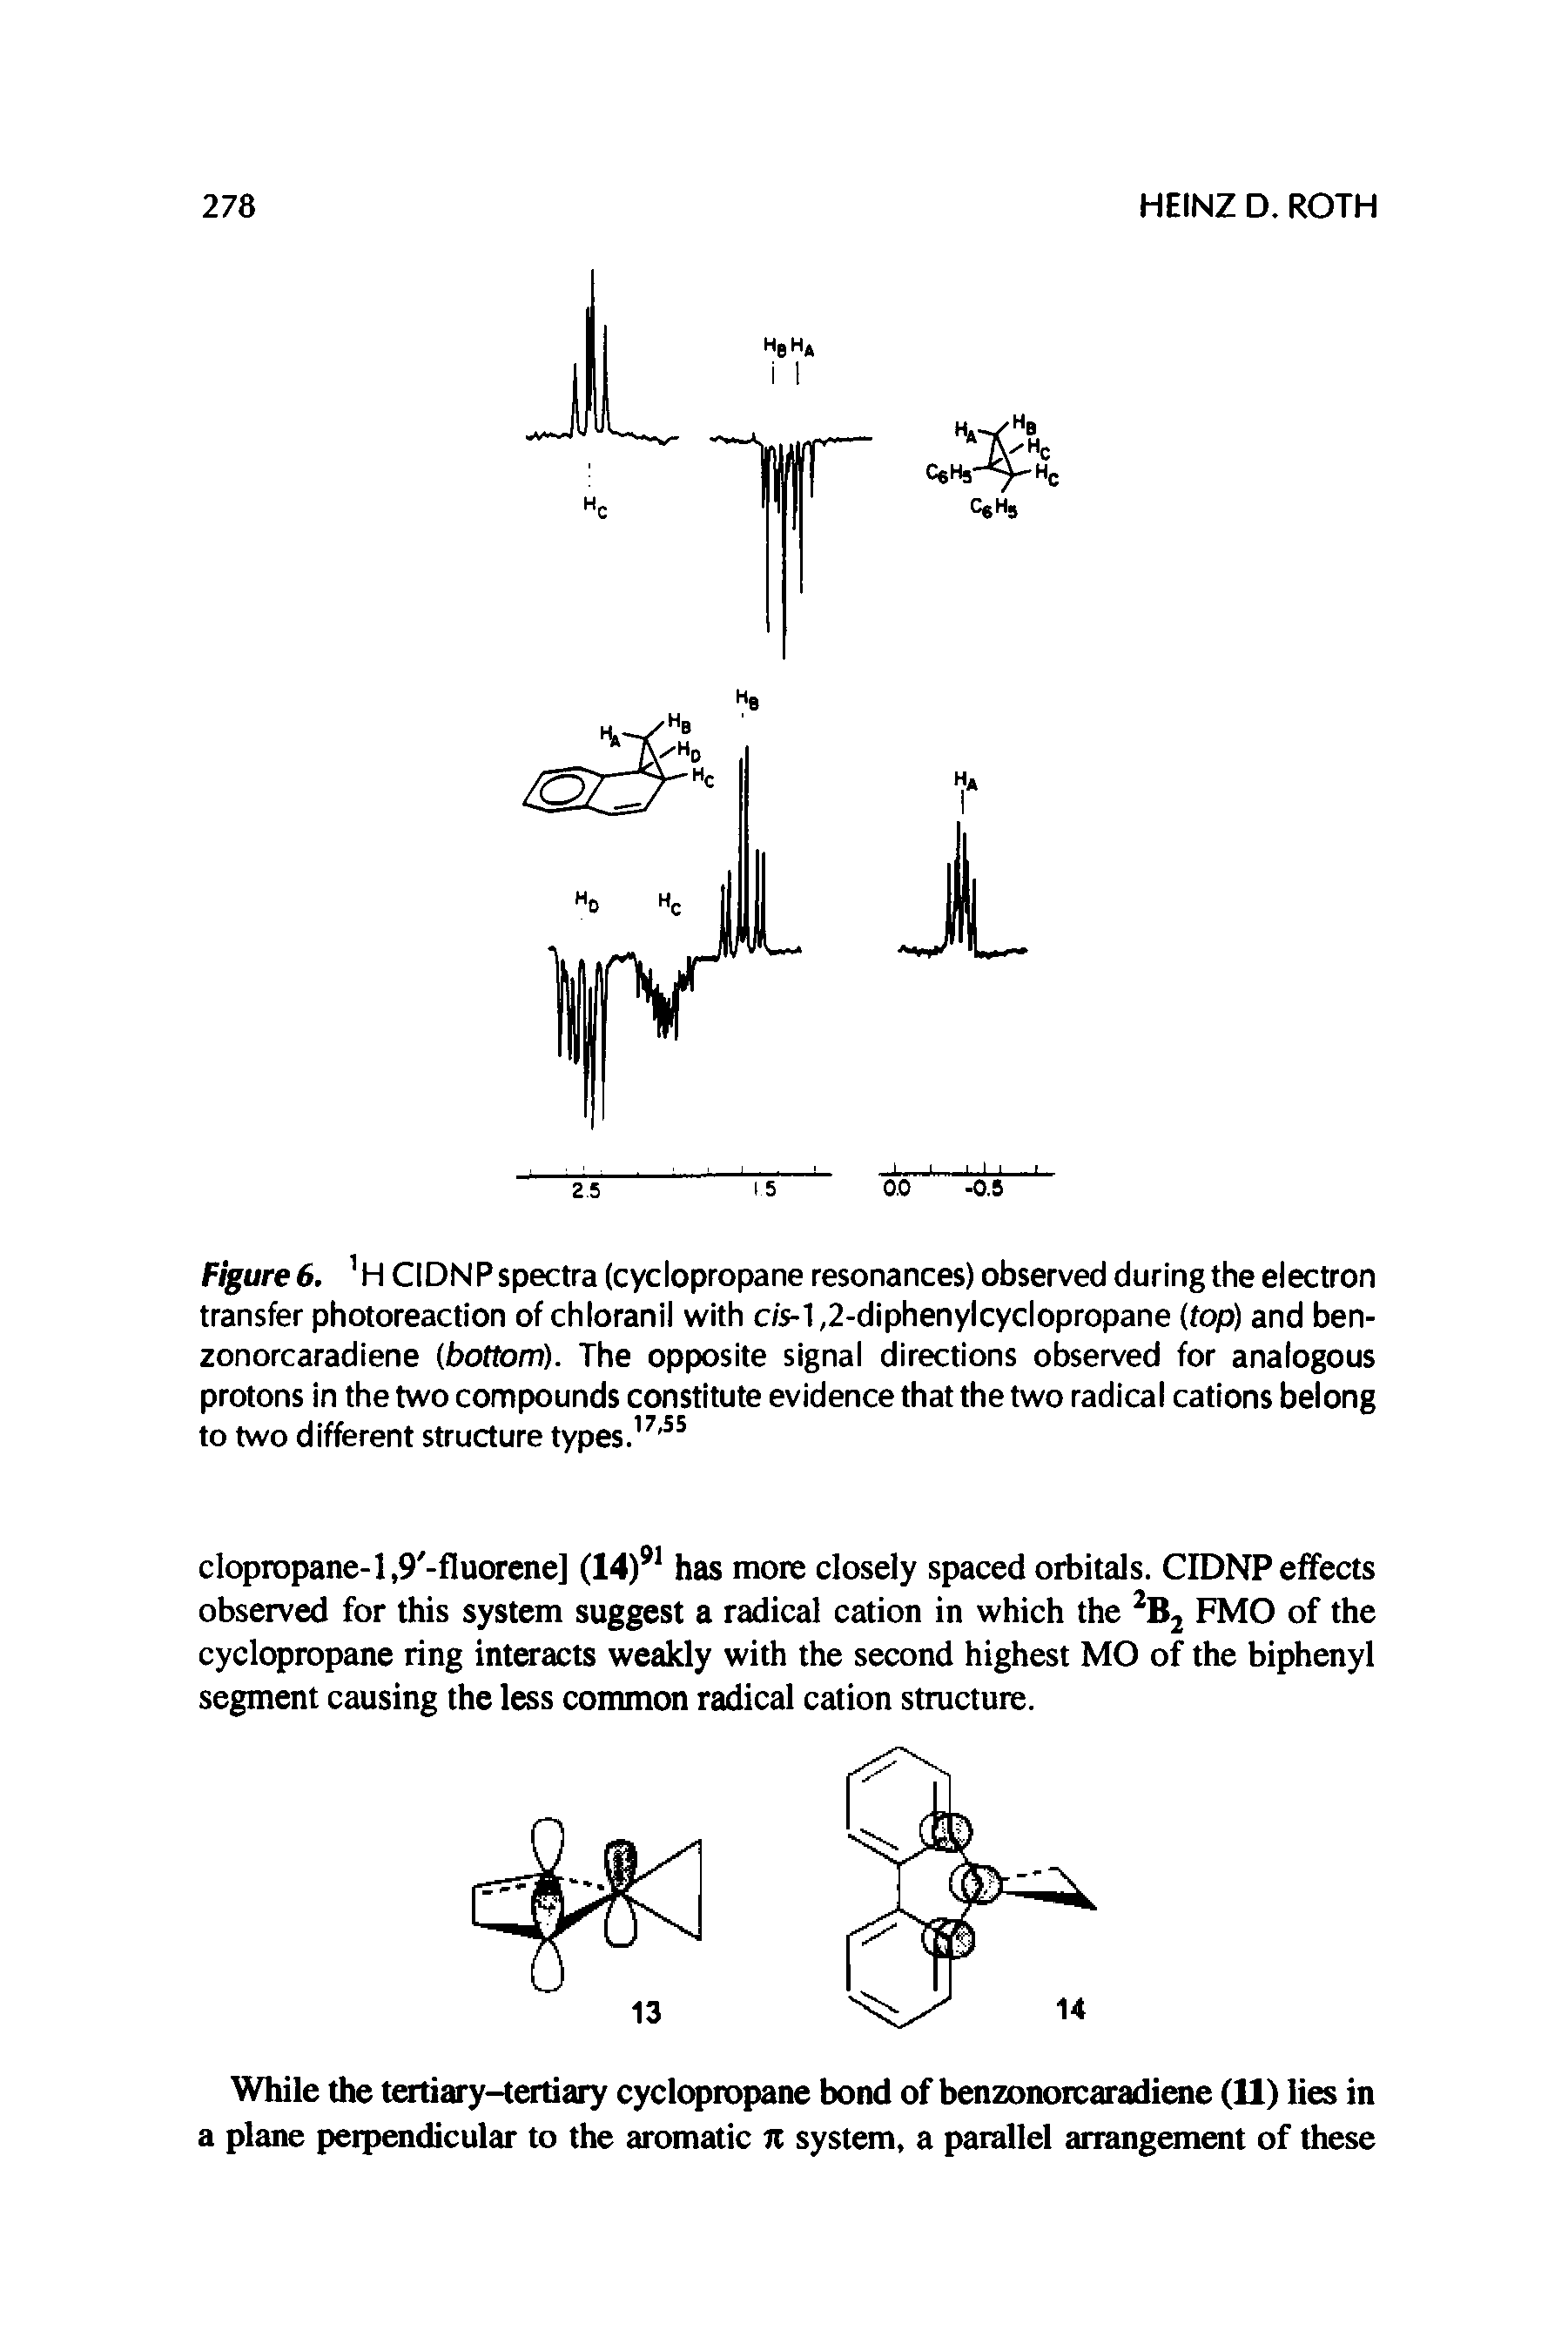 Figures, h CIDNP spectra (cyclopropane resonances) observed during the electron transfer photoreaction of chloranil with c/s-1,2-diphenylcyclopropane (fop) and ben-zonorcaradiene (.bottom). The opposite signal directions observed for analogous protons in the two compounds constitute evidence that the two radical cations belong to two different structure types.